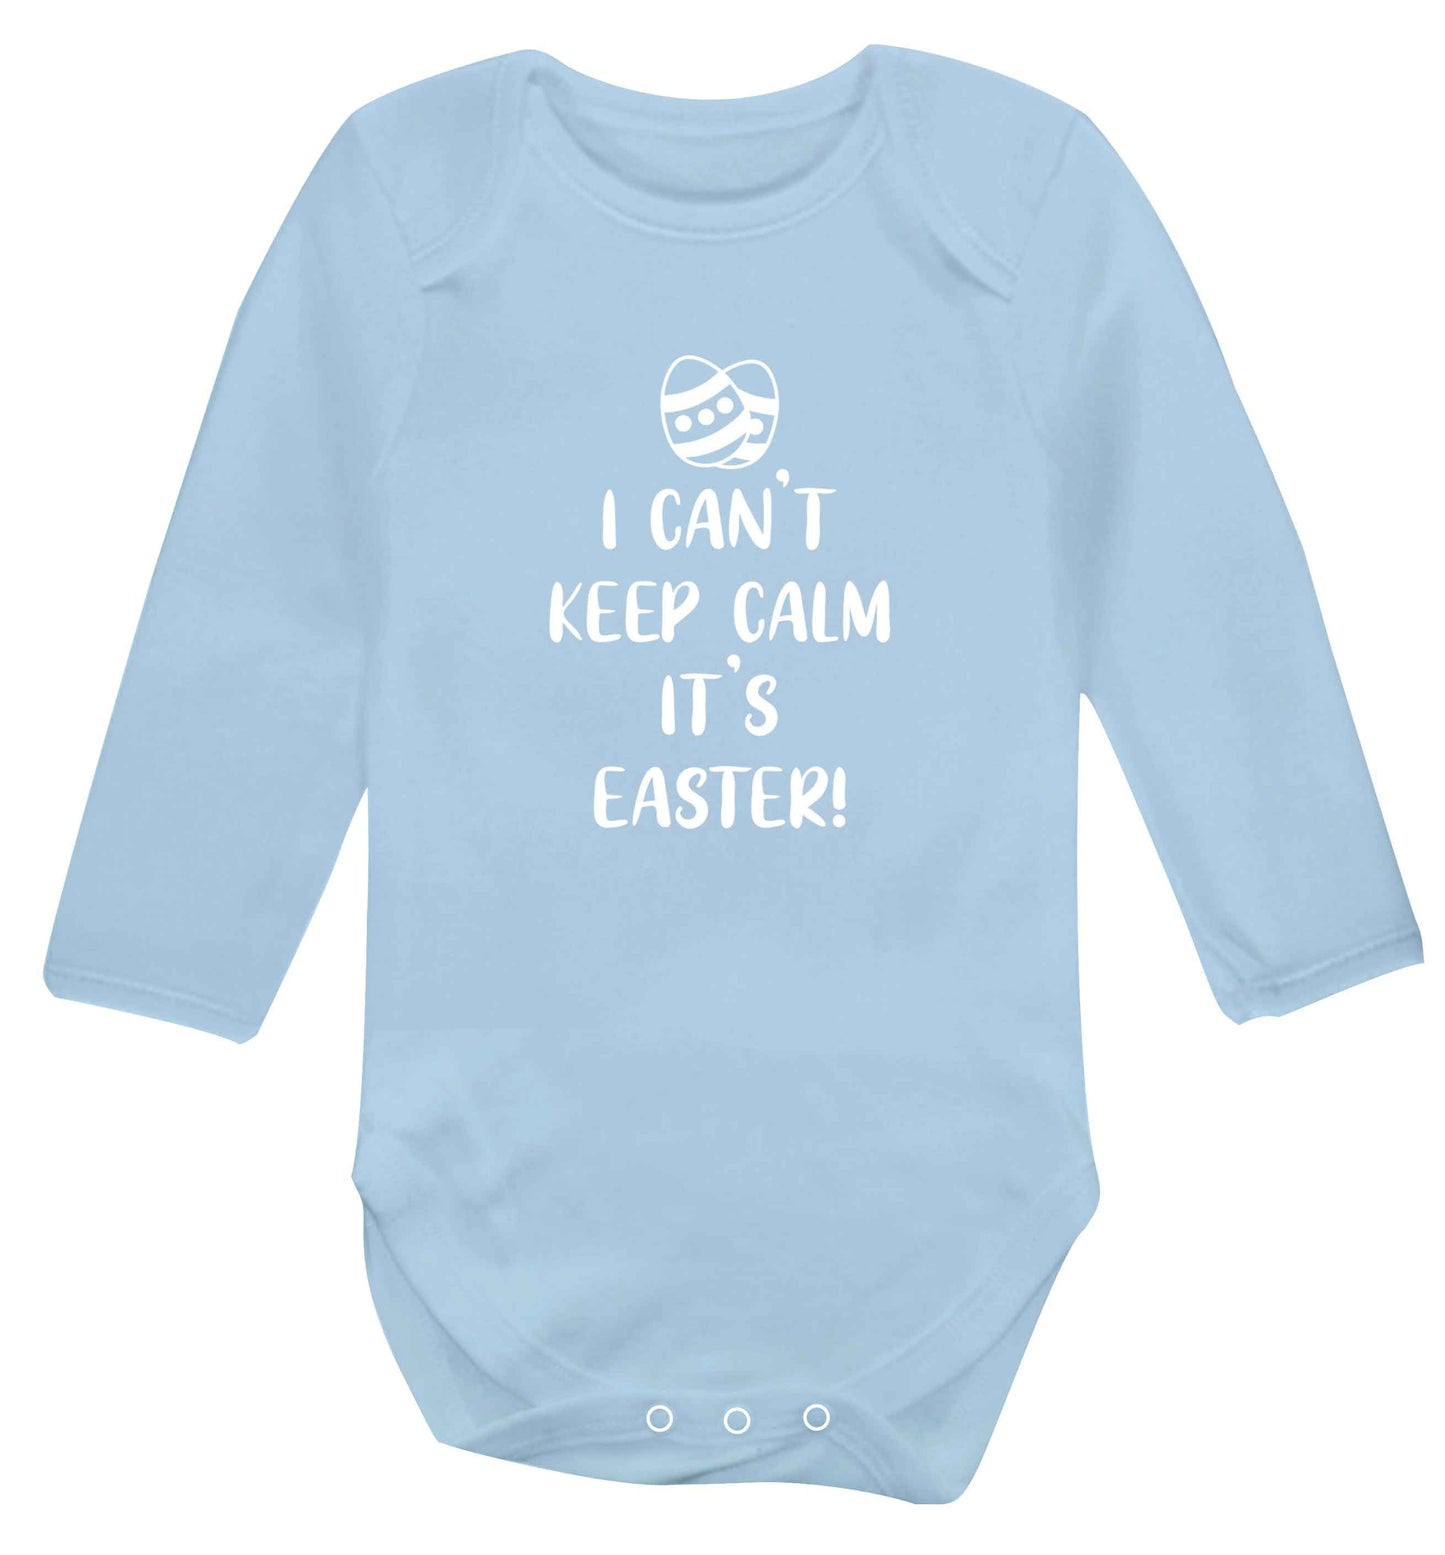 I can't keep calm it's Easter baby vest long sleeved pale blue 6-12 months